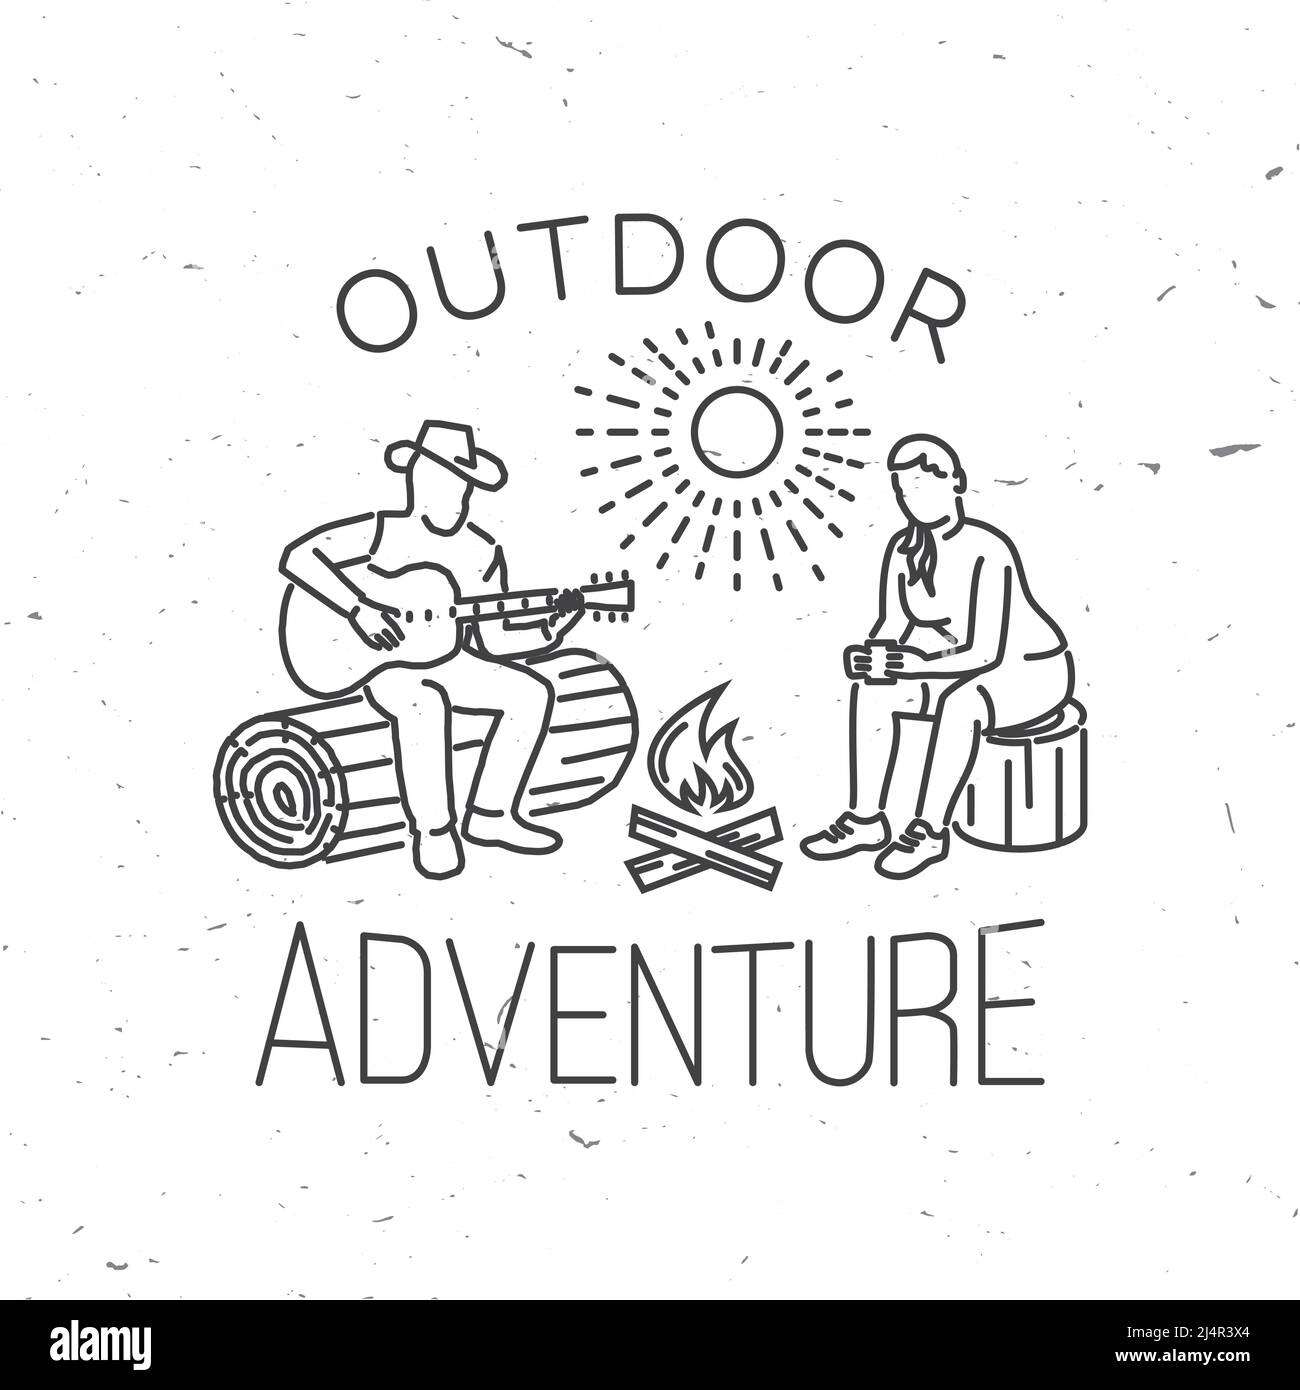 Outdoor adventure badge. Vector illustration. Concept for shirt or print, stamp, travel badge or tee. Vintage line art design with camper tent, pot on Stock Vector